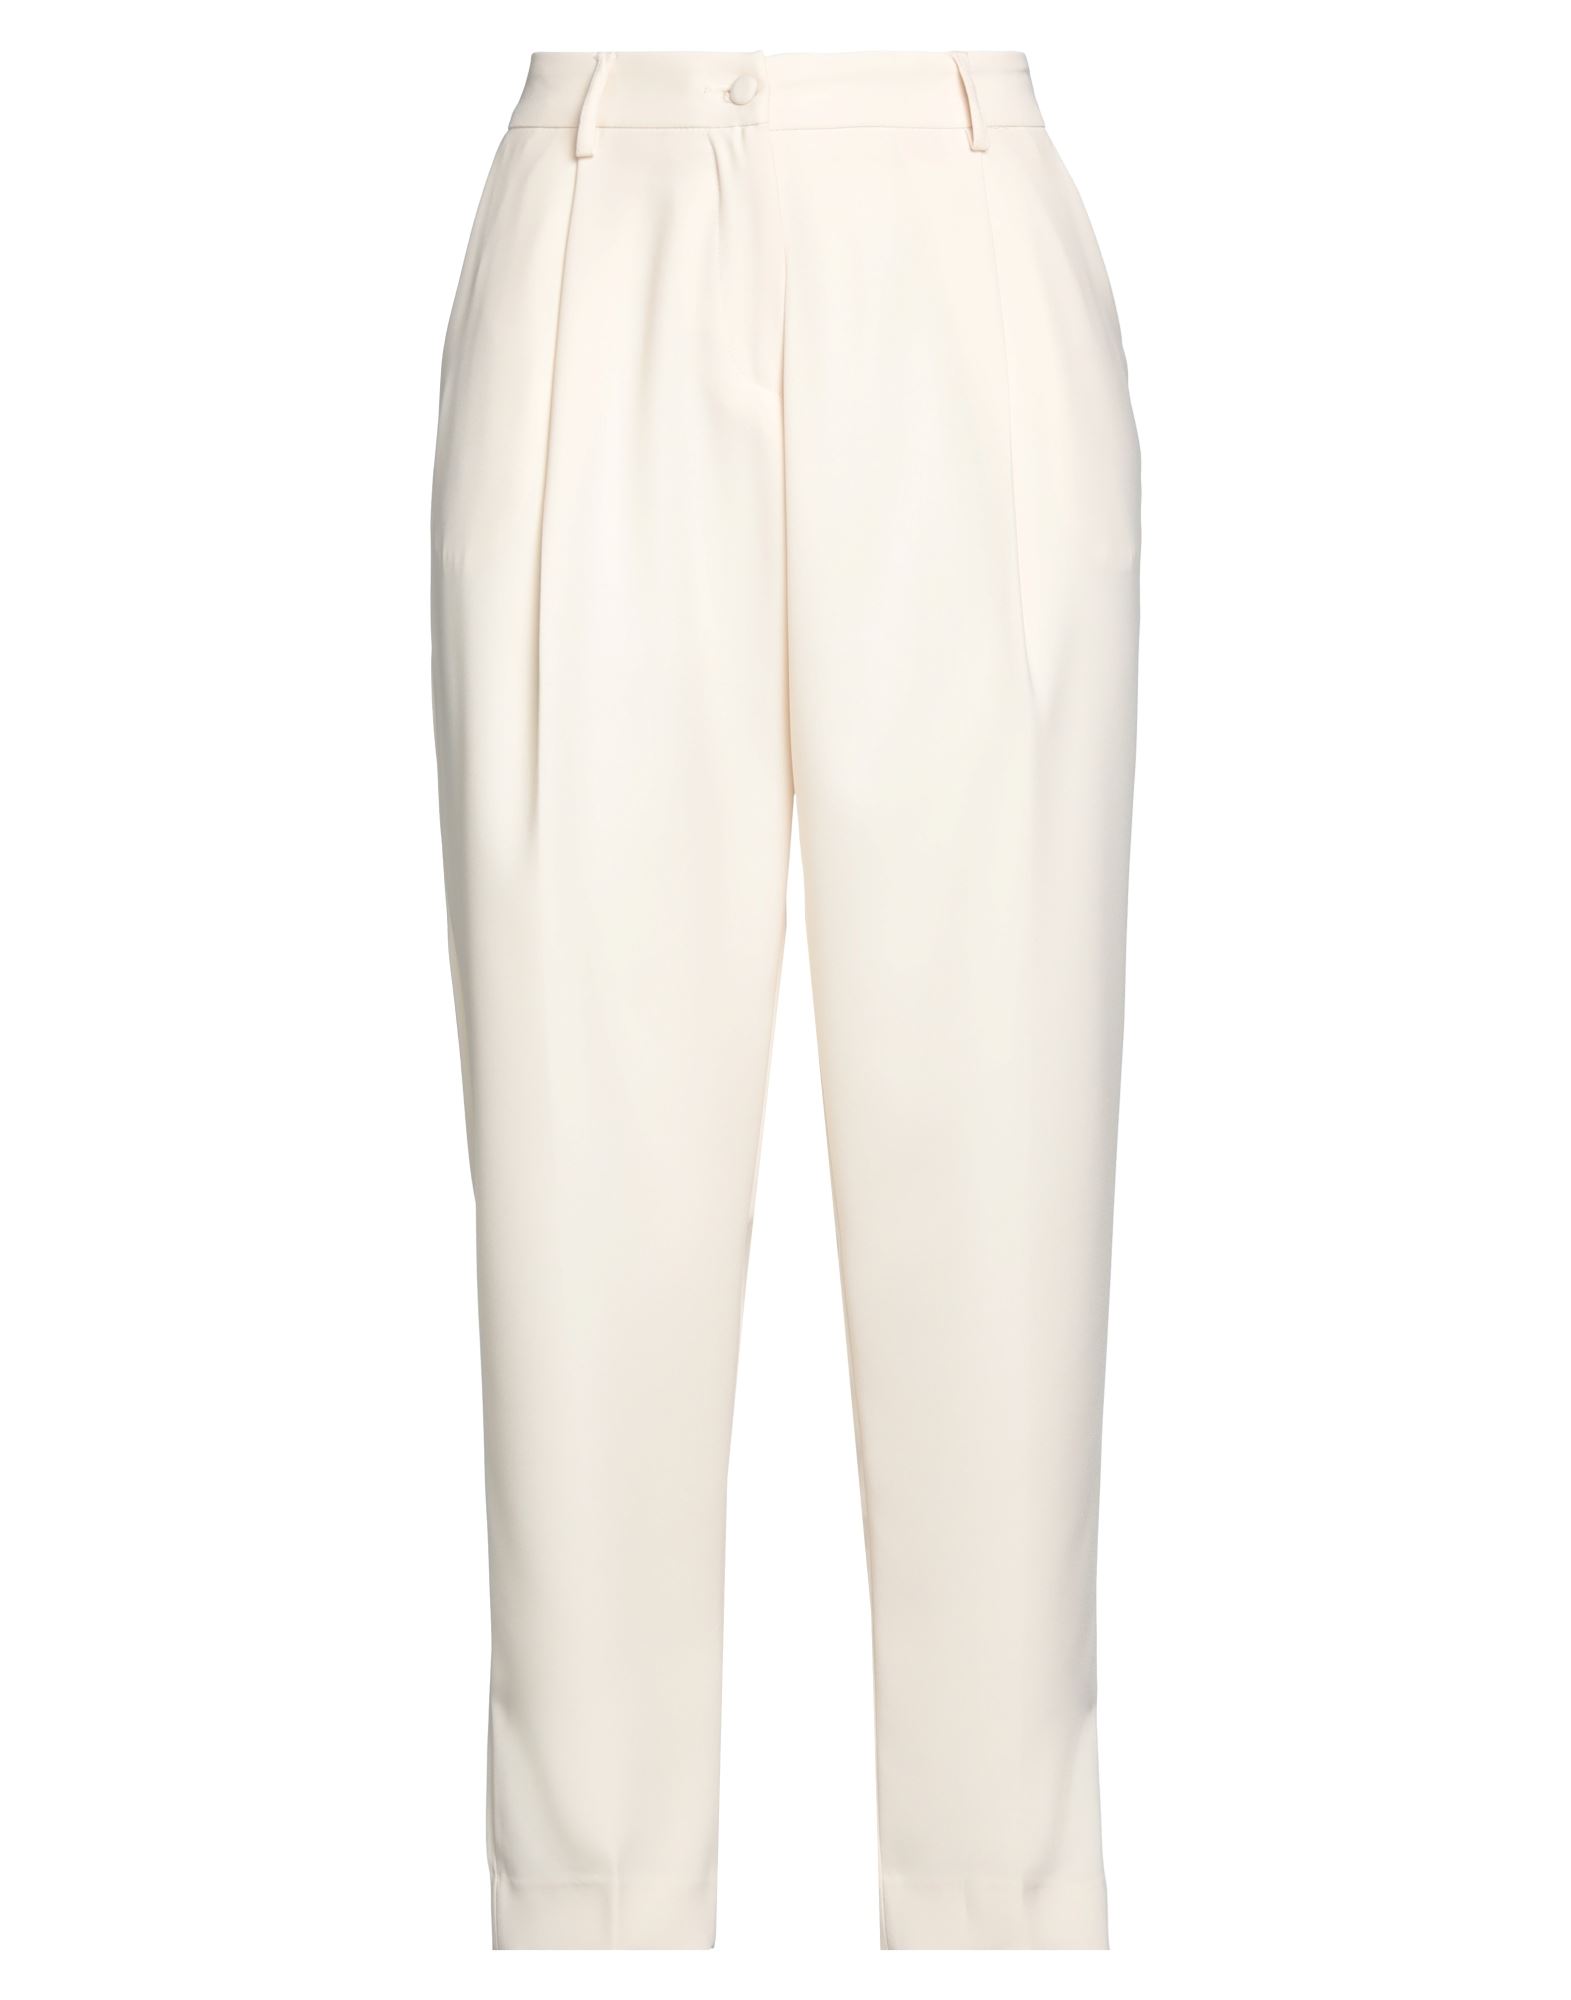 Nora Barth Woman Pants Ivory Size 10 Polyester In White